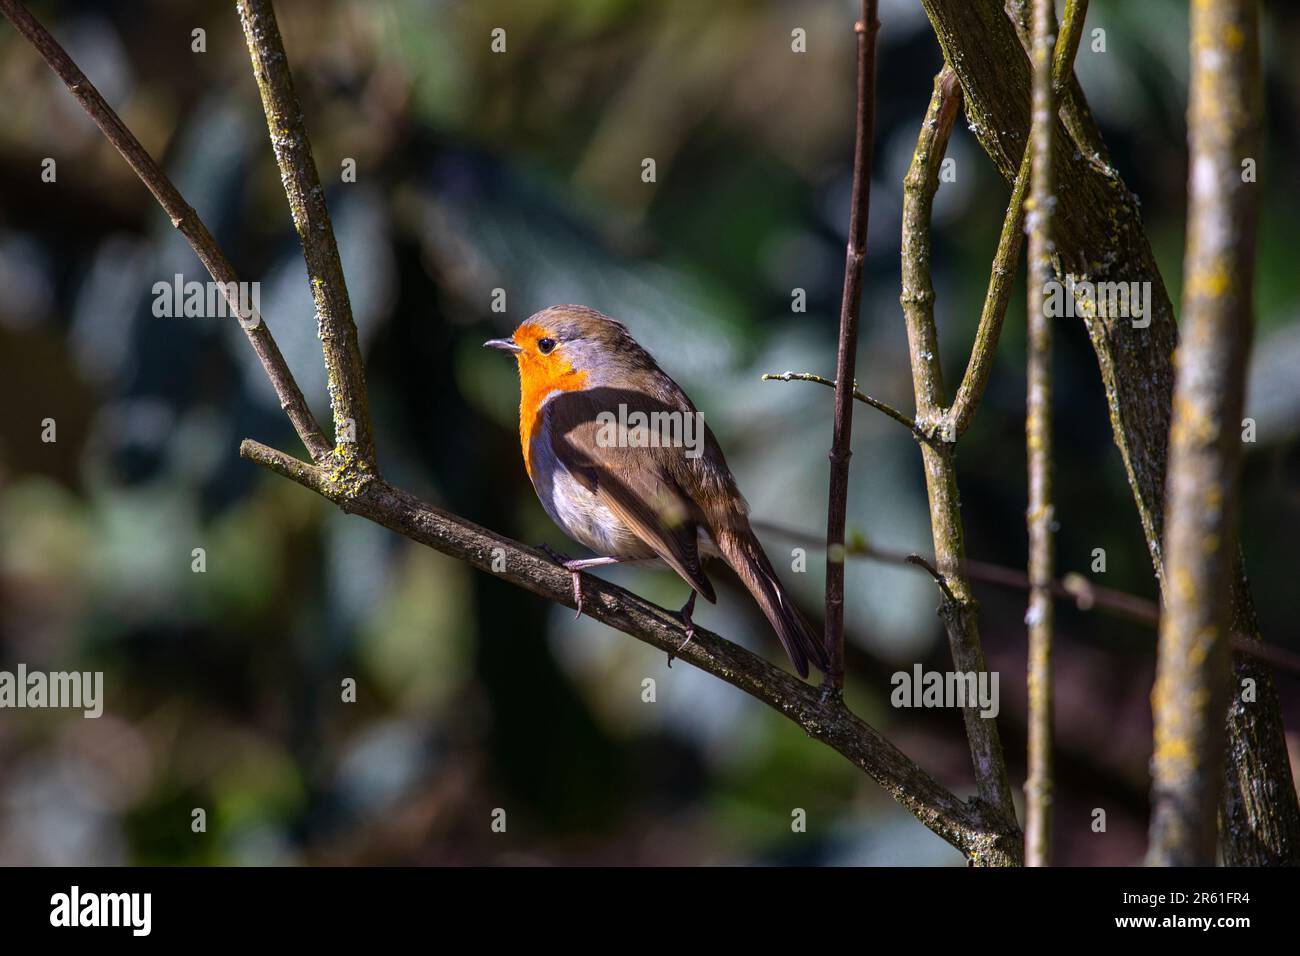 View of a beautiful European Robin perched on the branch of a tree. Stock Photo